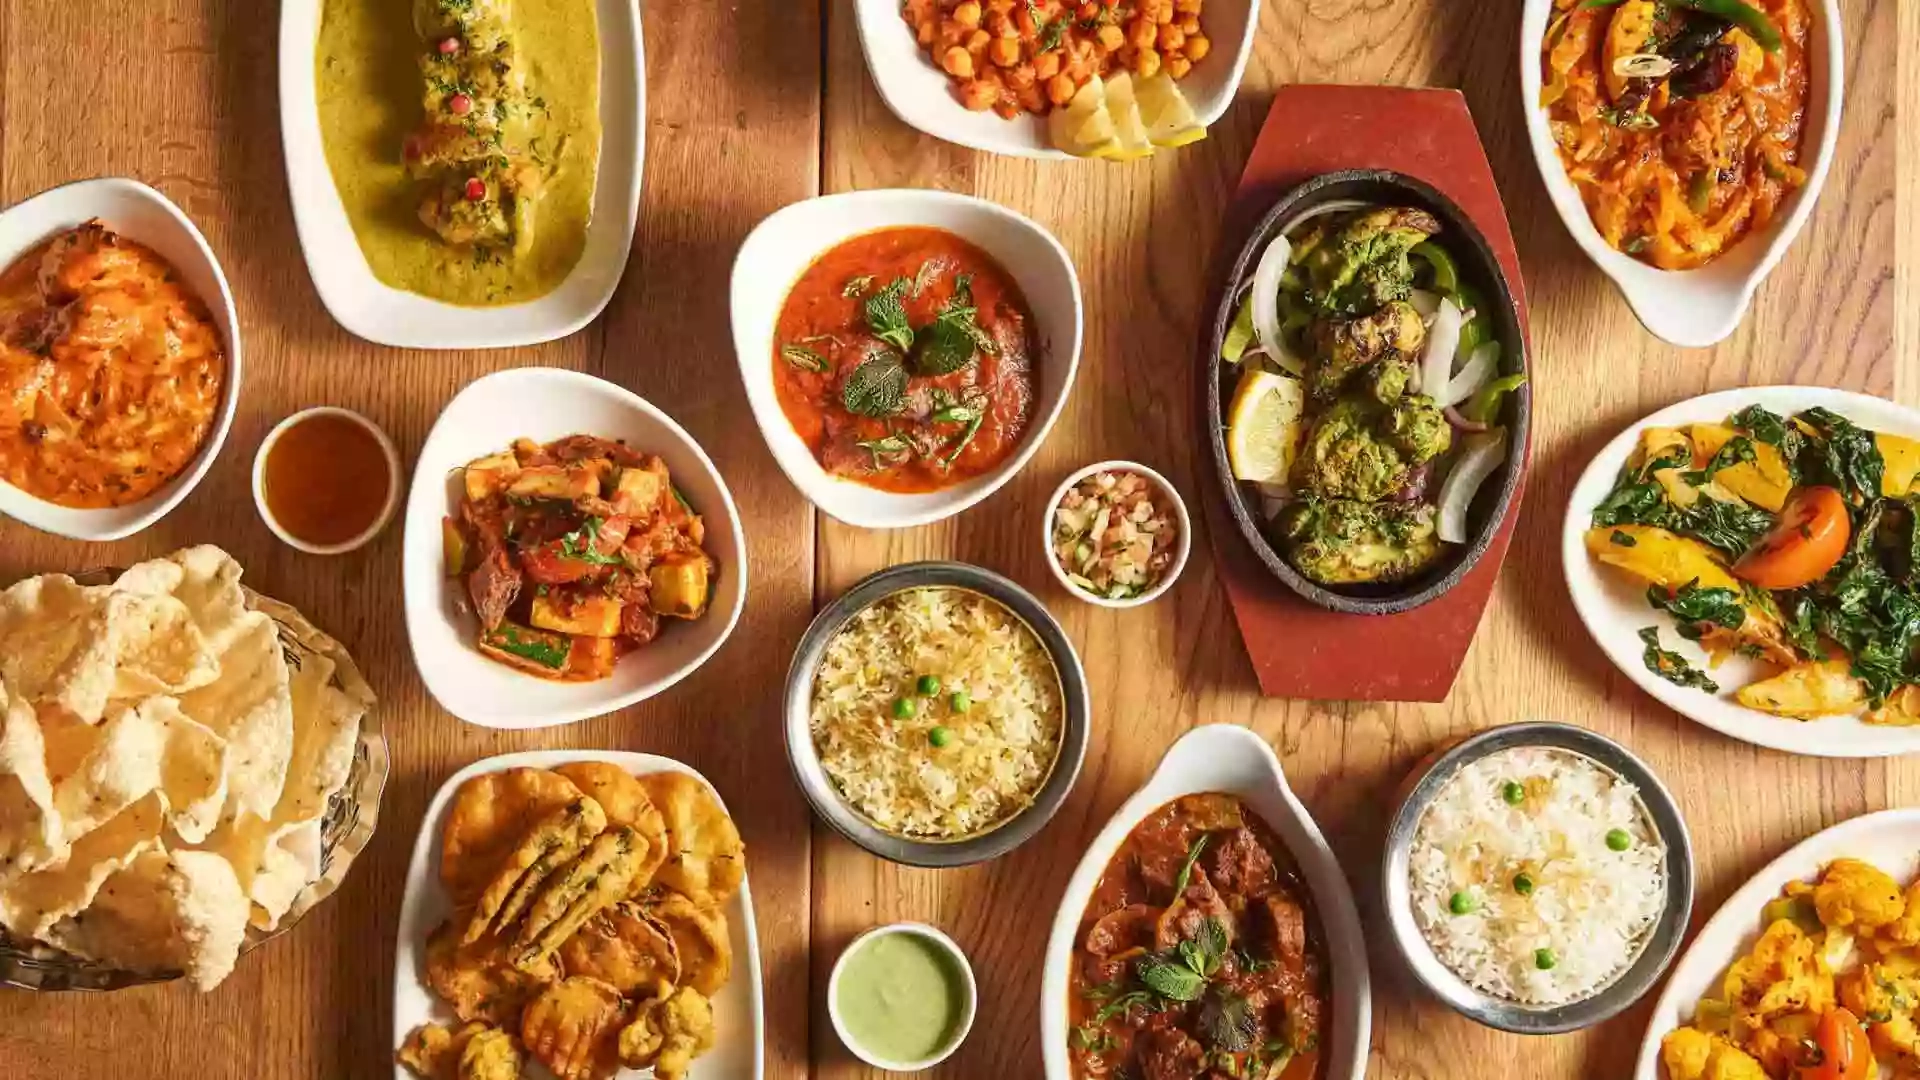 Holy Cow - Fine Indian Dining - Indian Restaurant & Takeaway in Limehouse - Canary Wharf